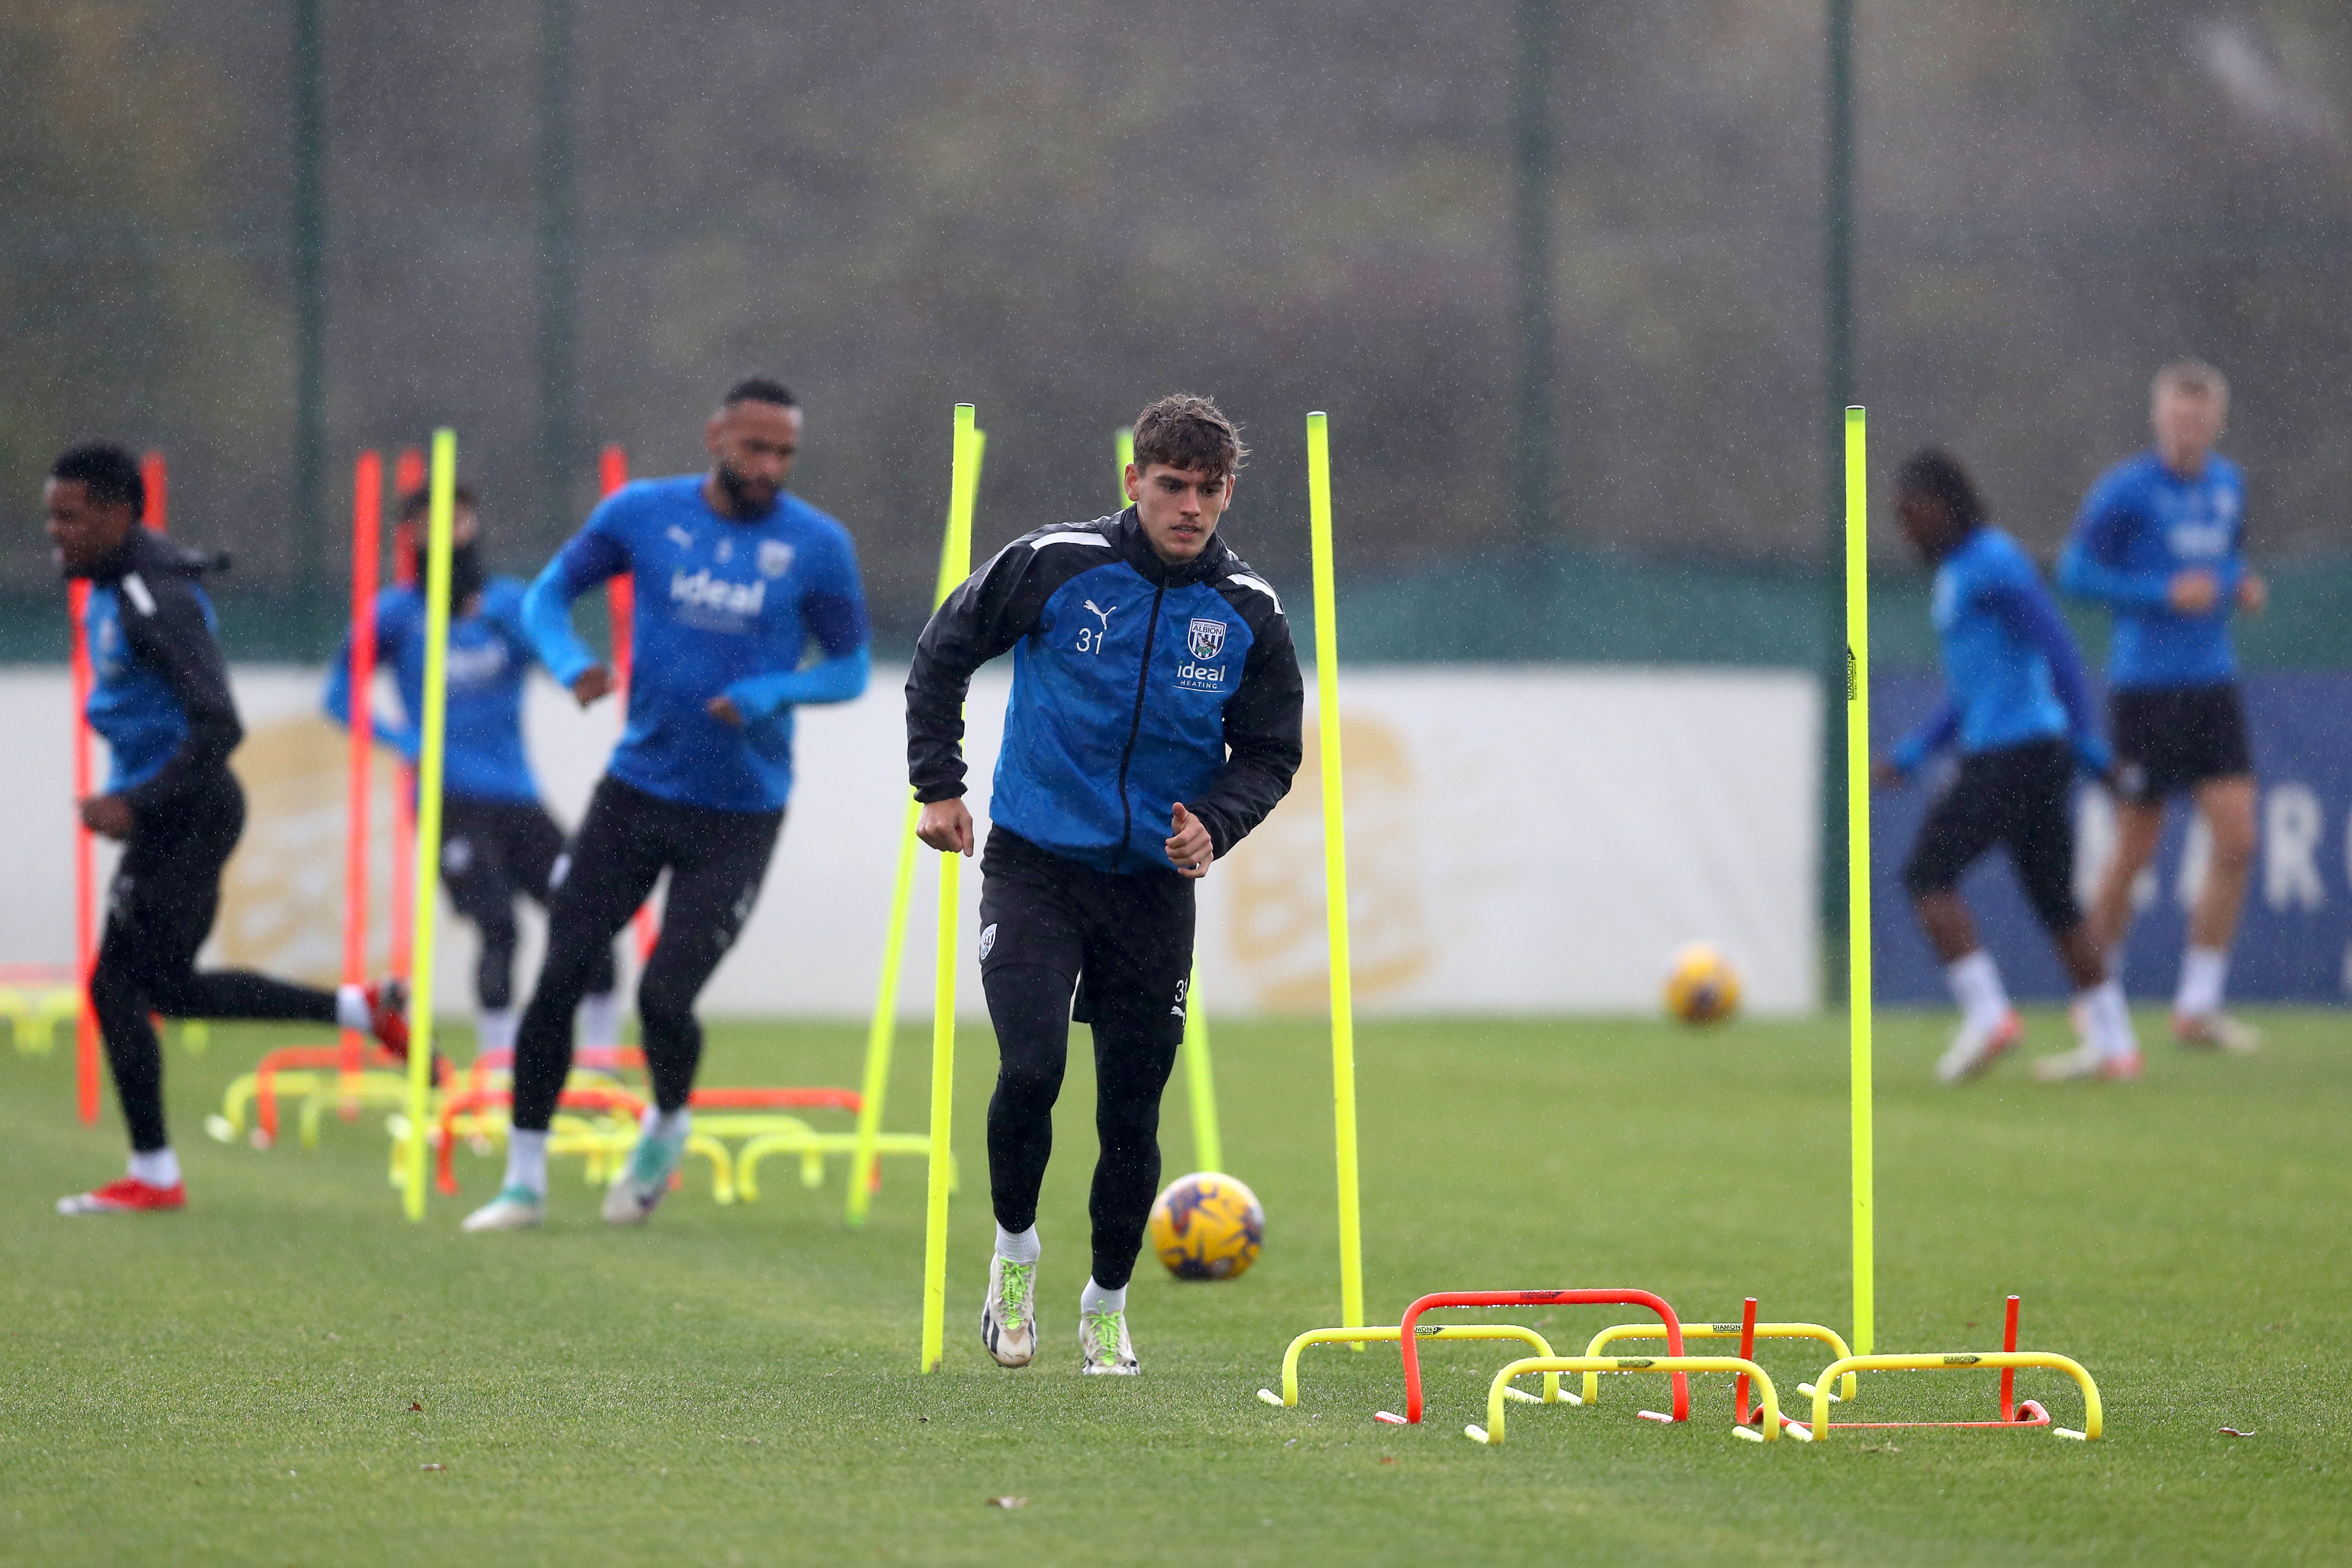 Albion players in training.